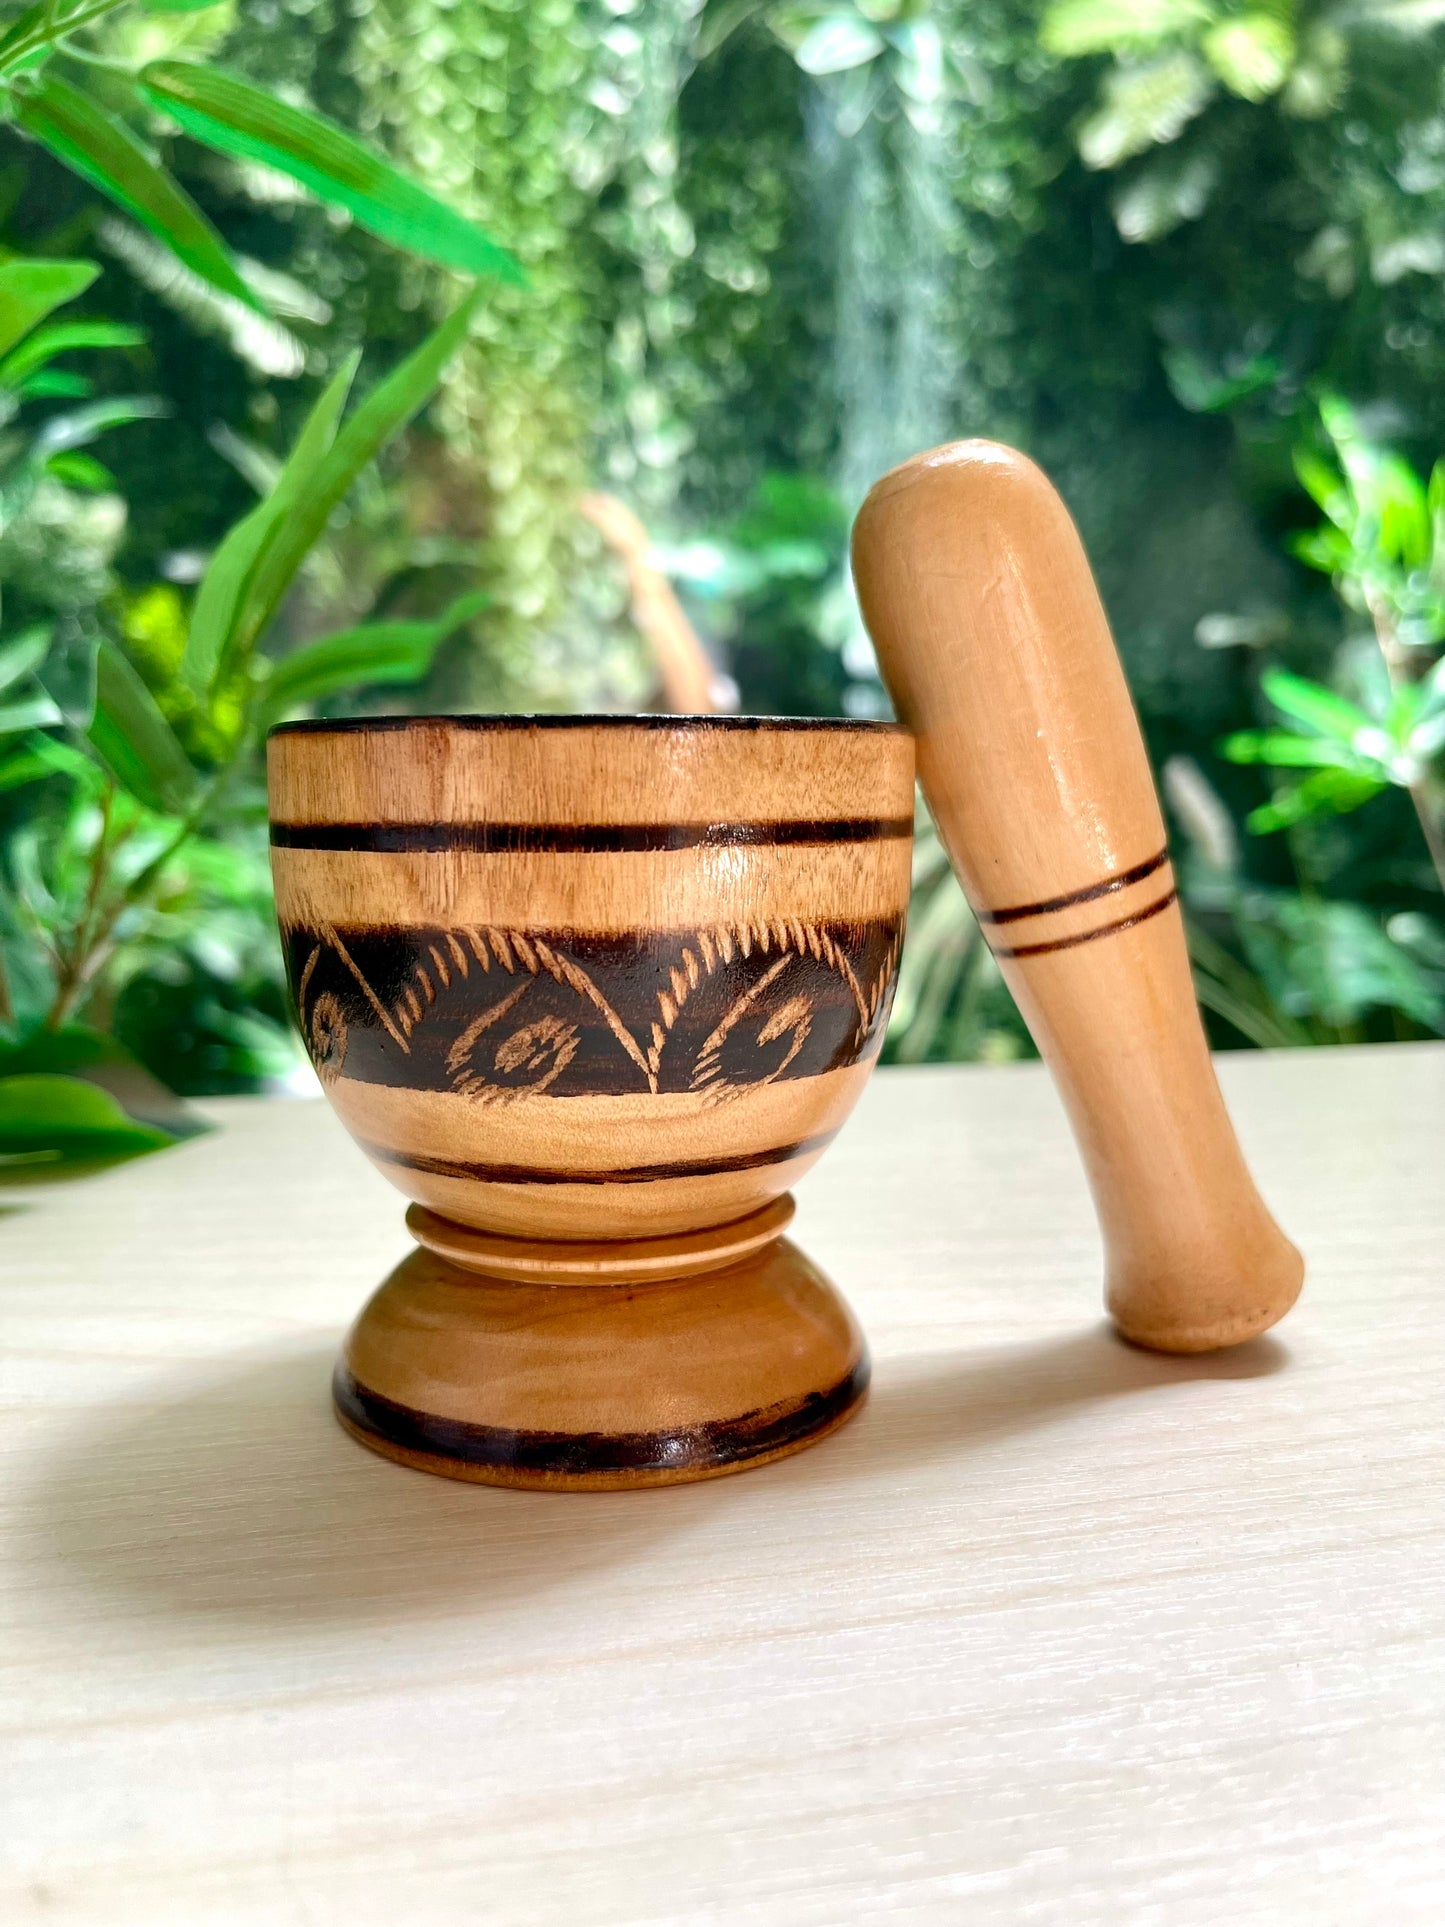 90's Doh Ywer Myanmar Set of Mortar and Pestle